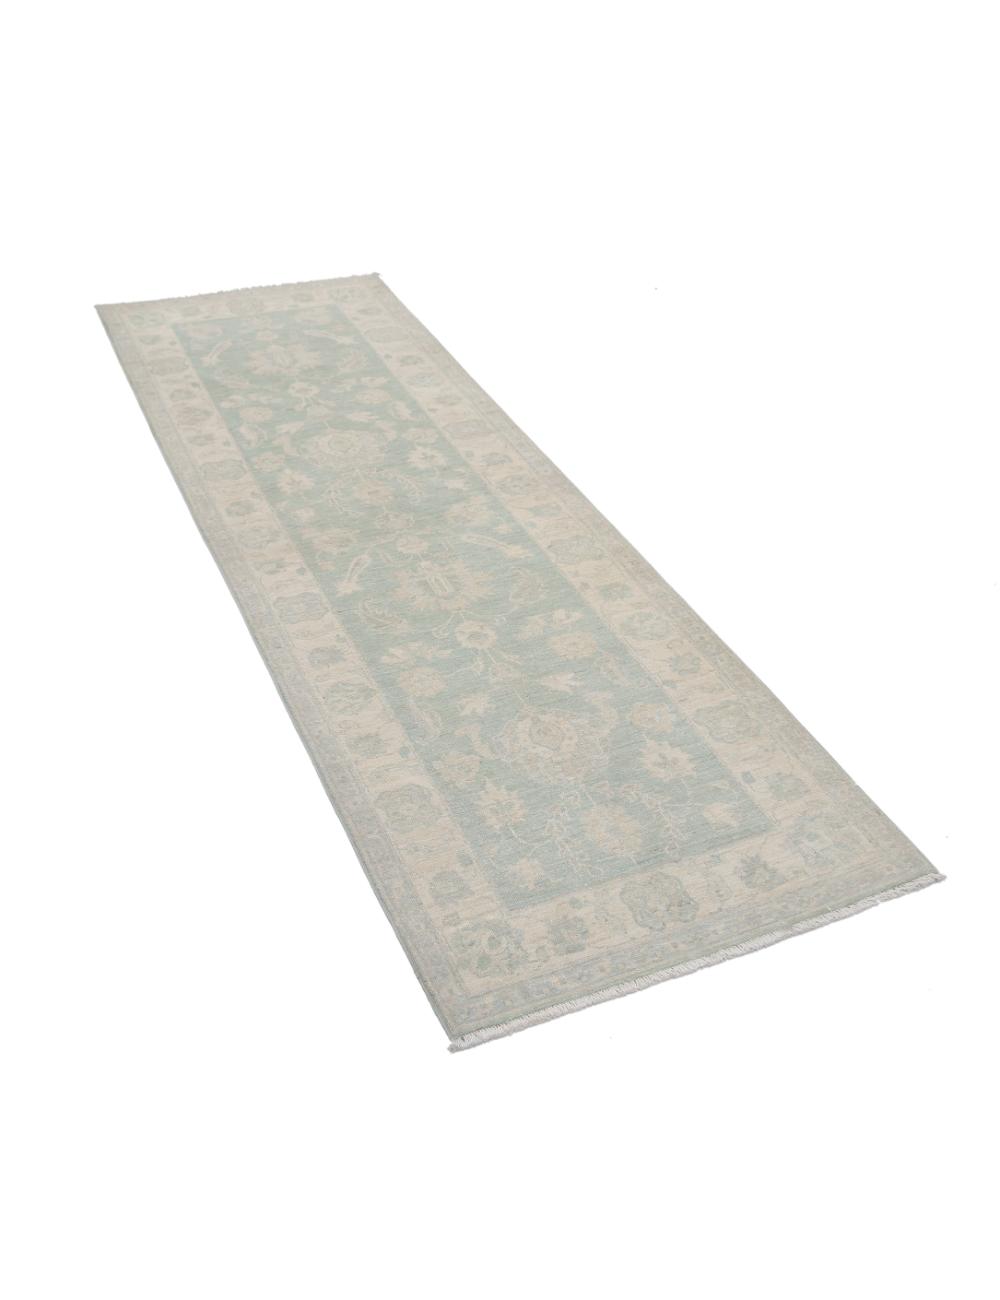 Serenity 2' 7" X 7' 7" Hand-Knotted Wool Rug 2' 7" X 7' 7" (79 X 231) / Green / Ivory